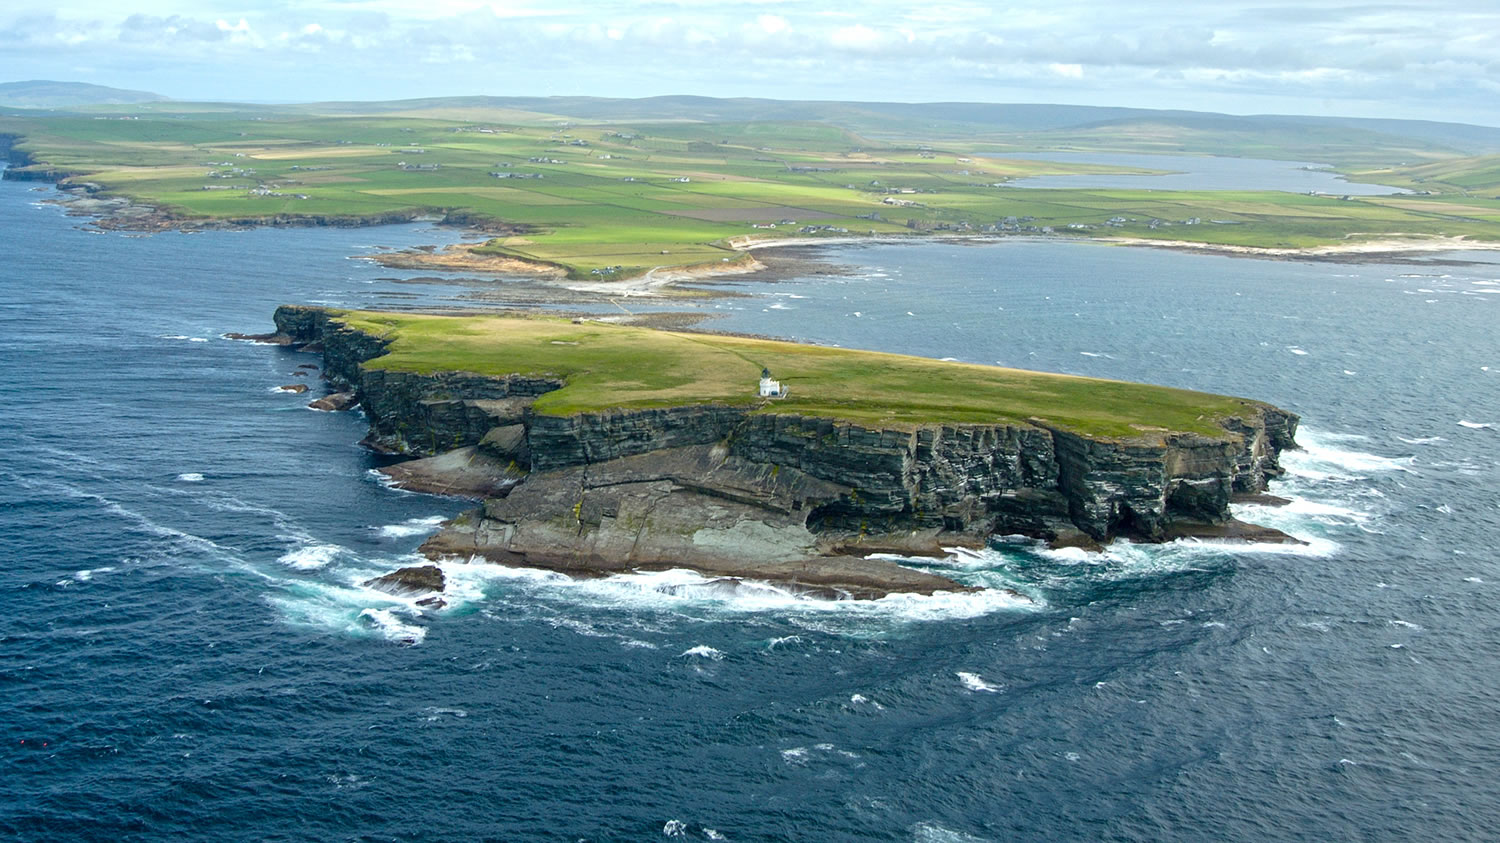 The Brough of Birsay, a tidal island in Orkney